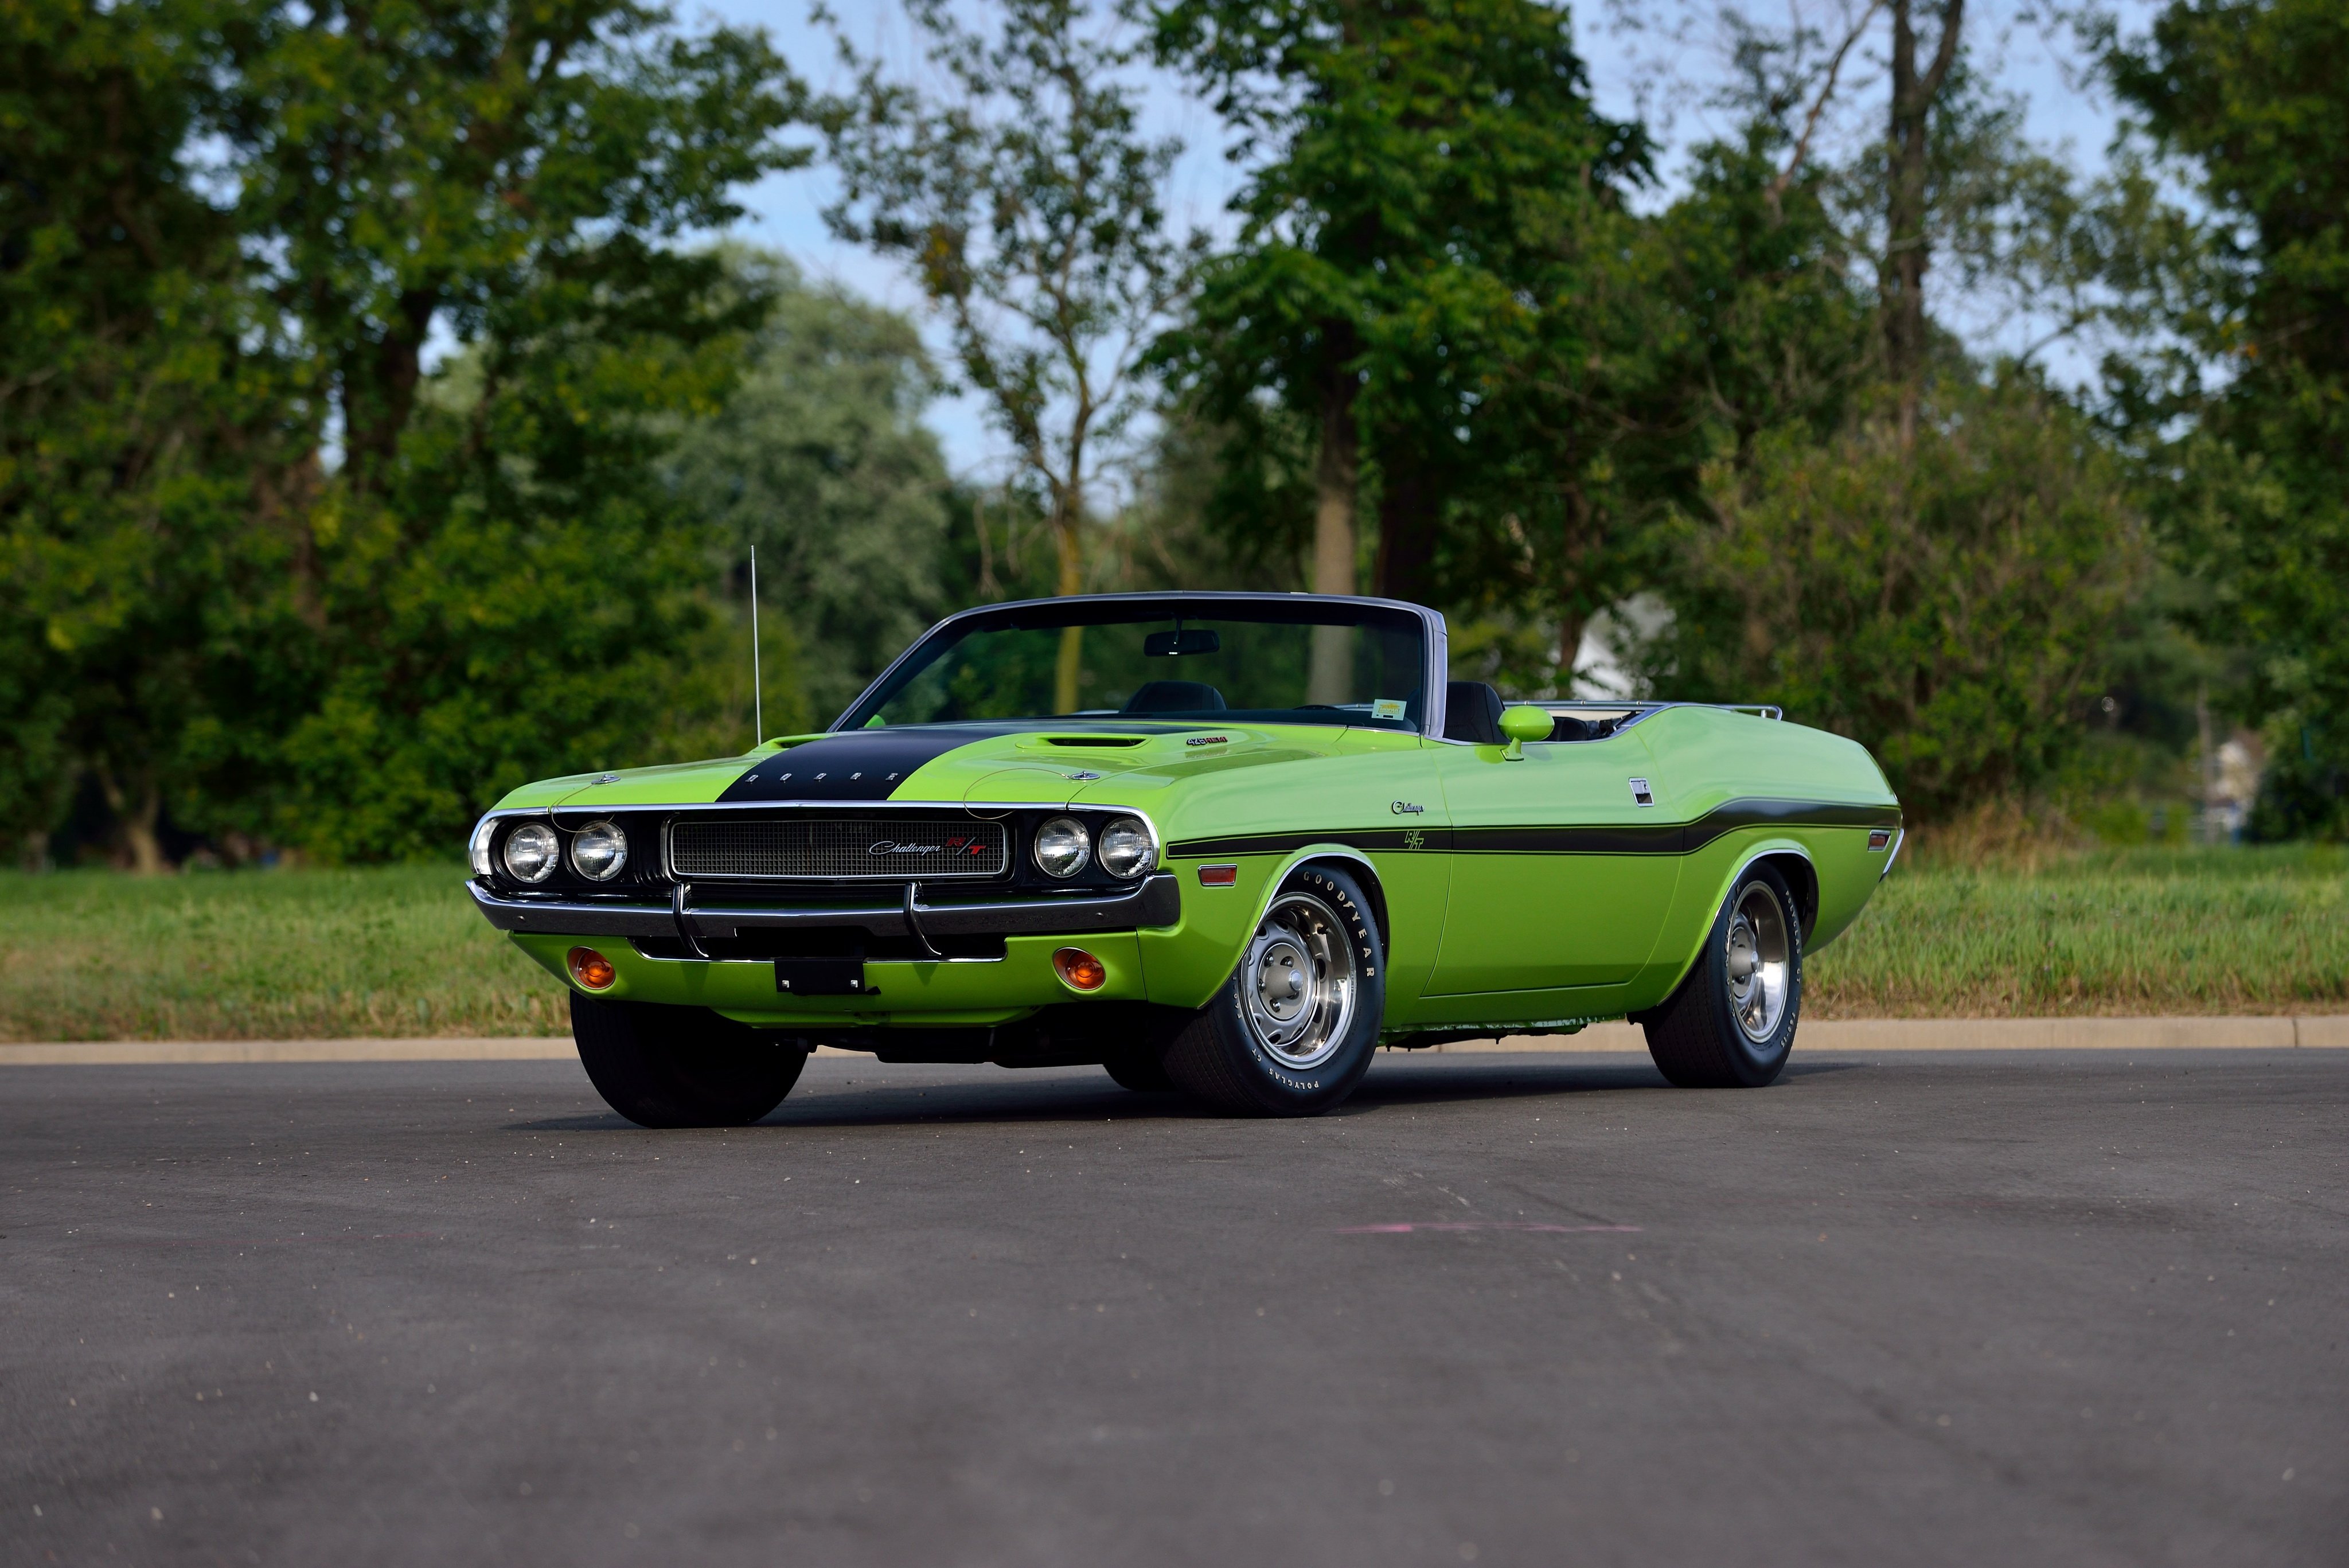 1970 Dodge Challenger R/T Convertible with a Hemi